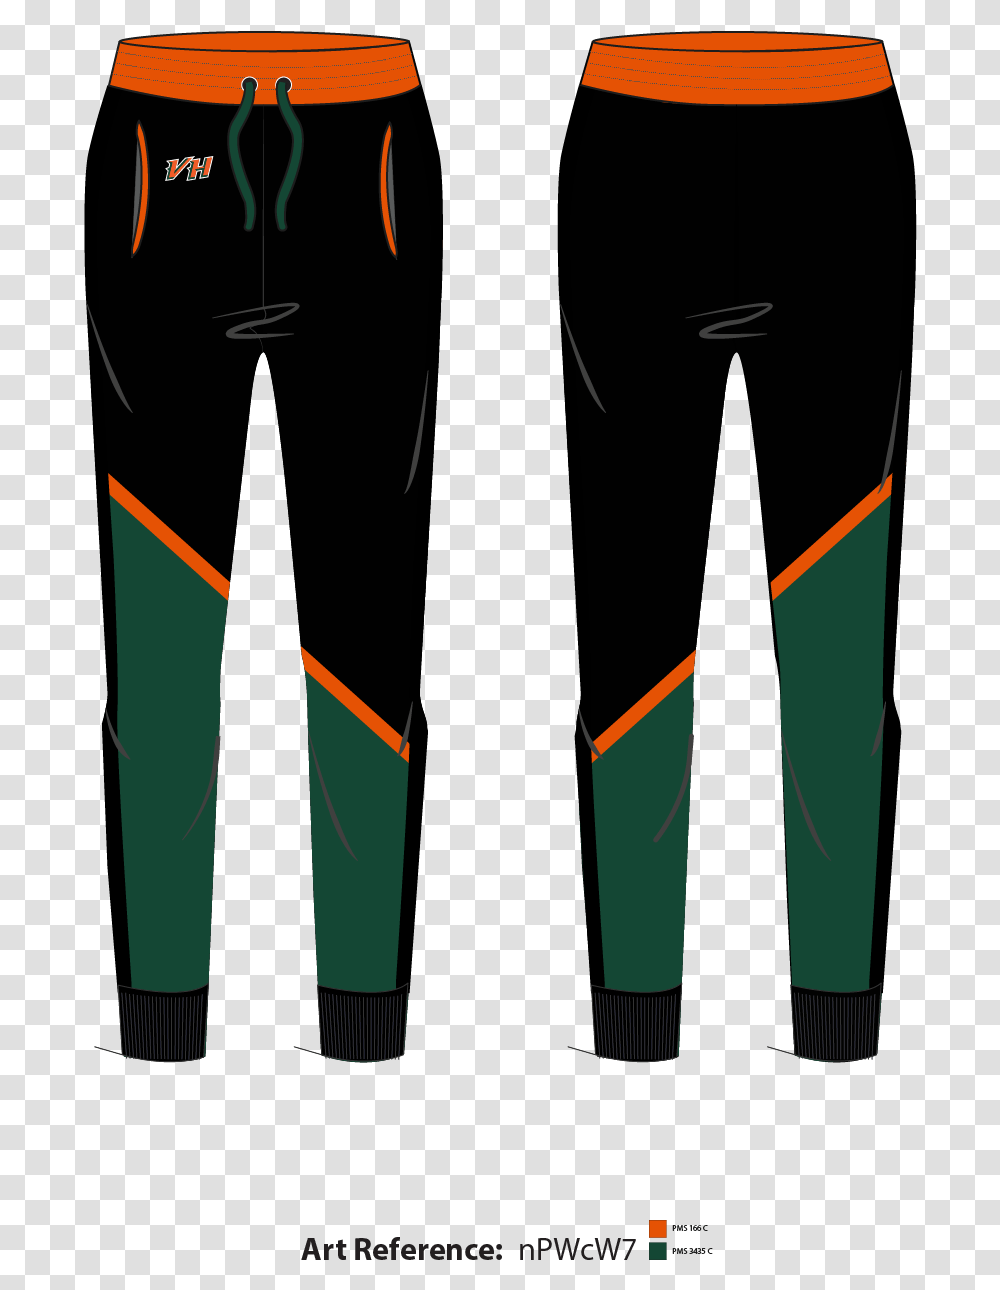 Victoria Hurricanes Joggers Pocket, Military, Military Uniform, Hand, Officer Transparent Png